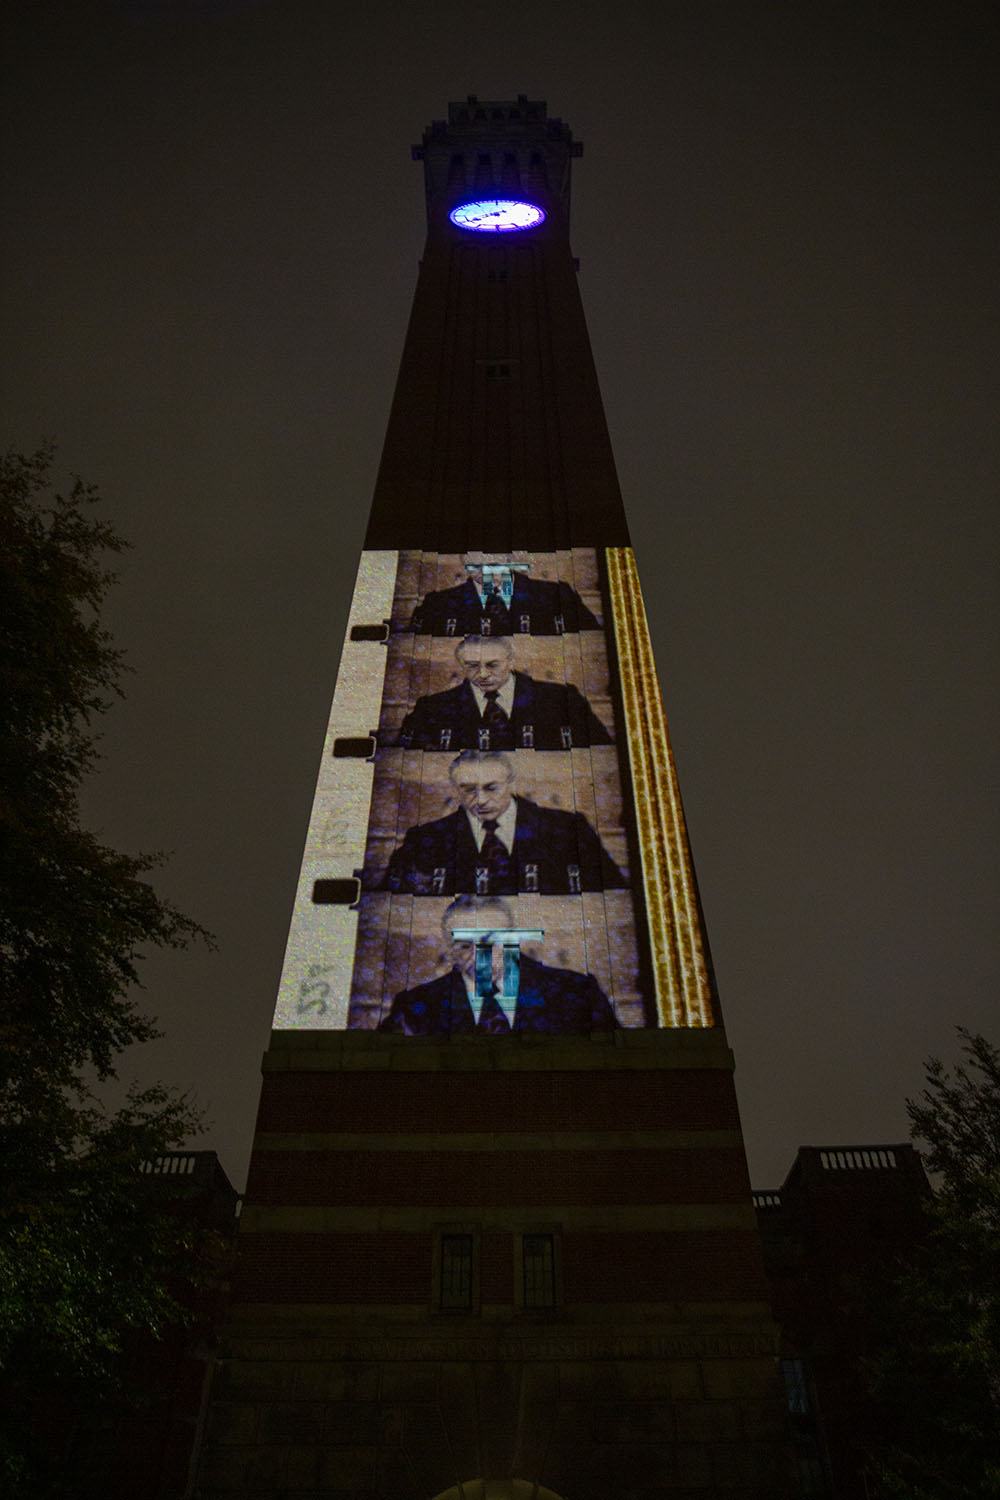 Art projected on the University of Birmingham clock tower